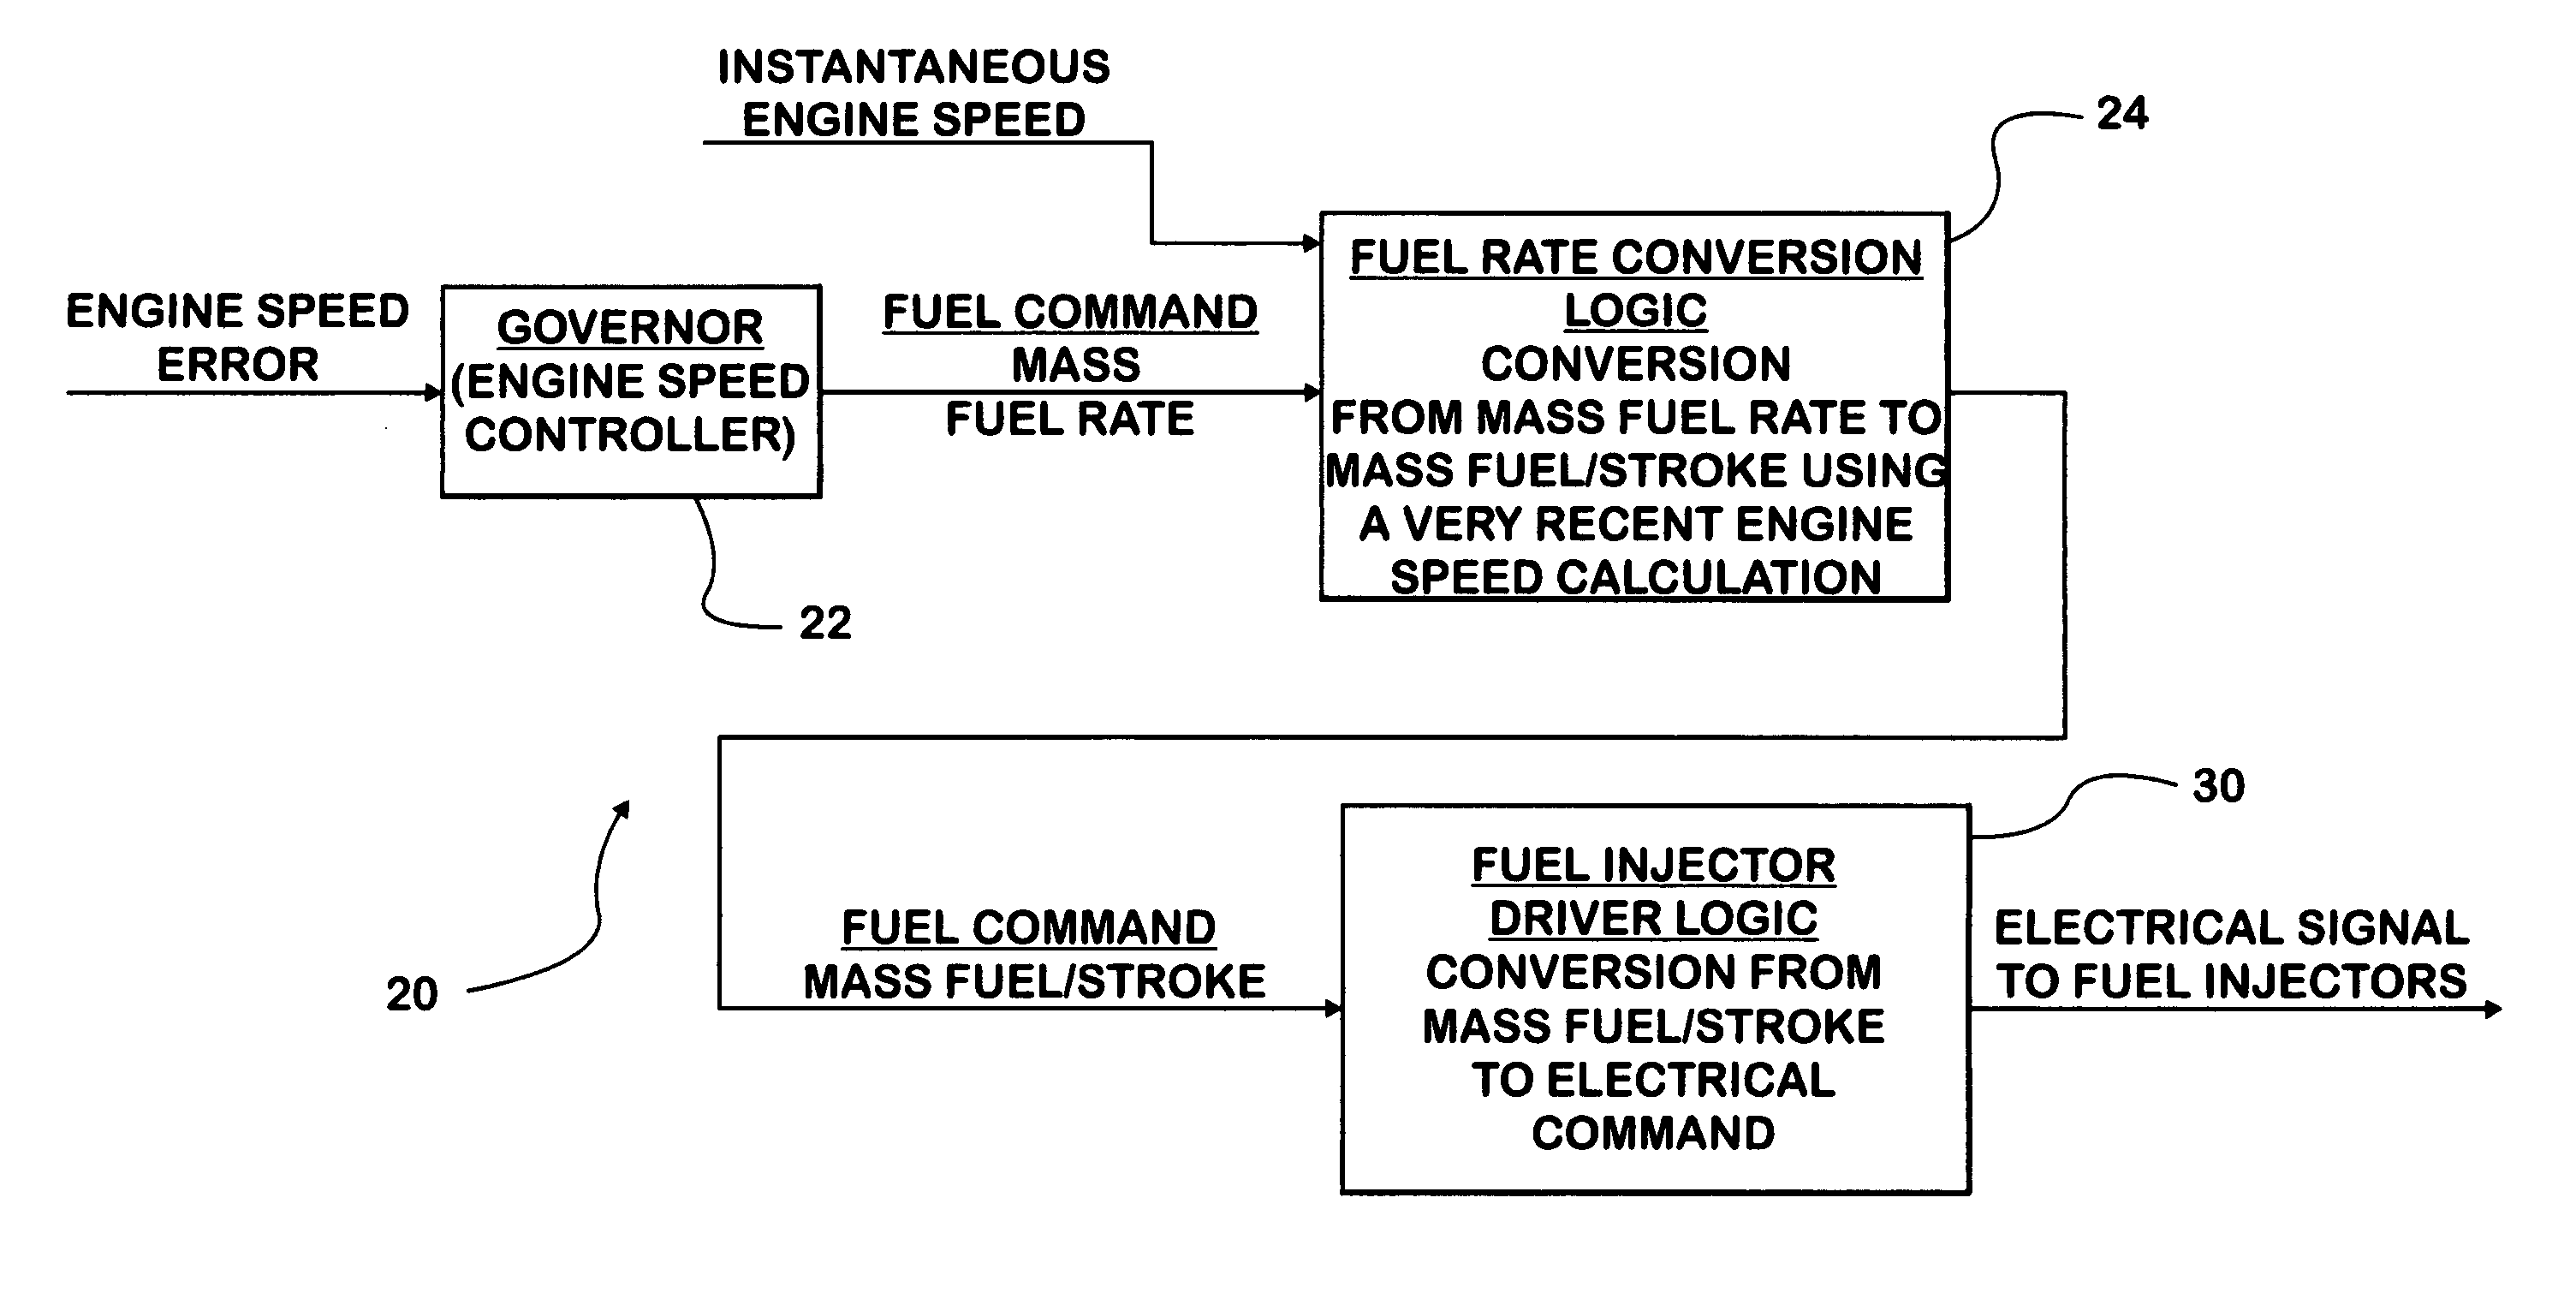 Engine speed stabilization using fuel rate control